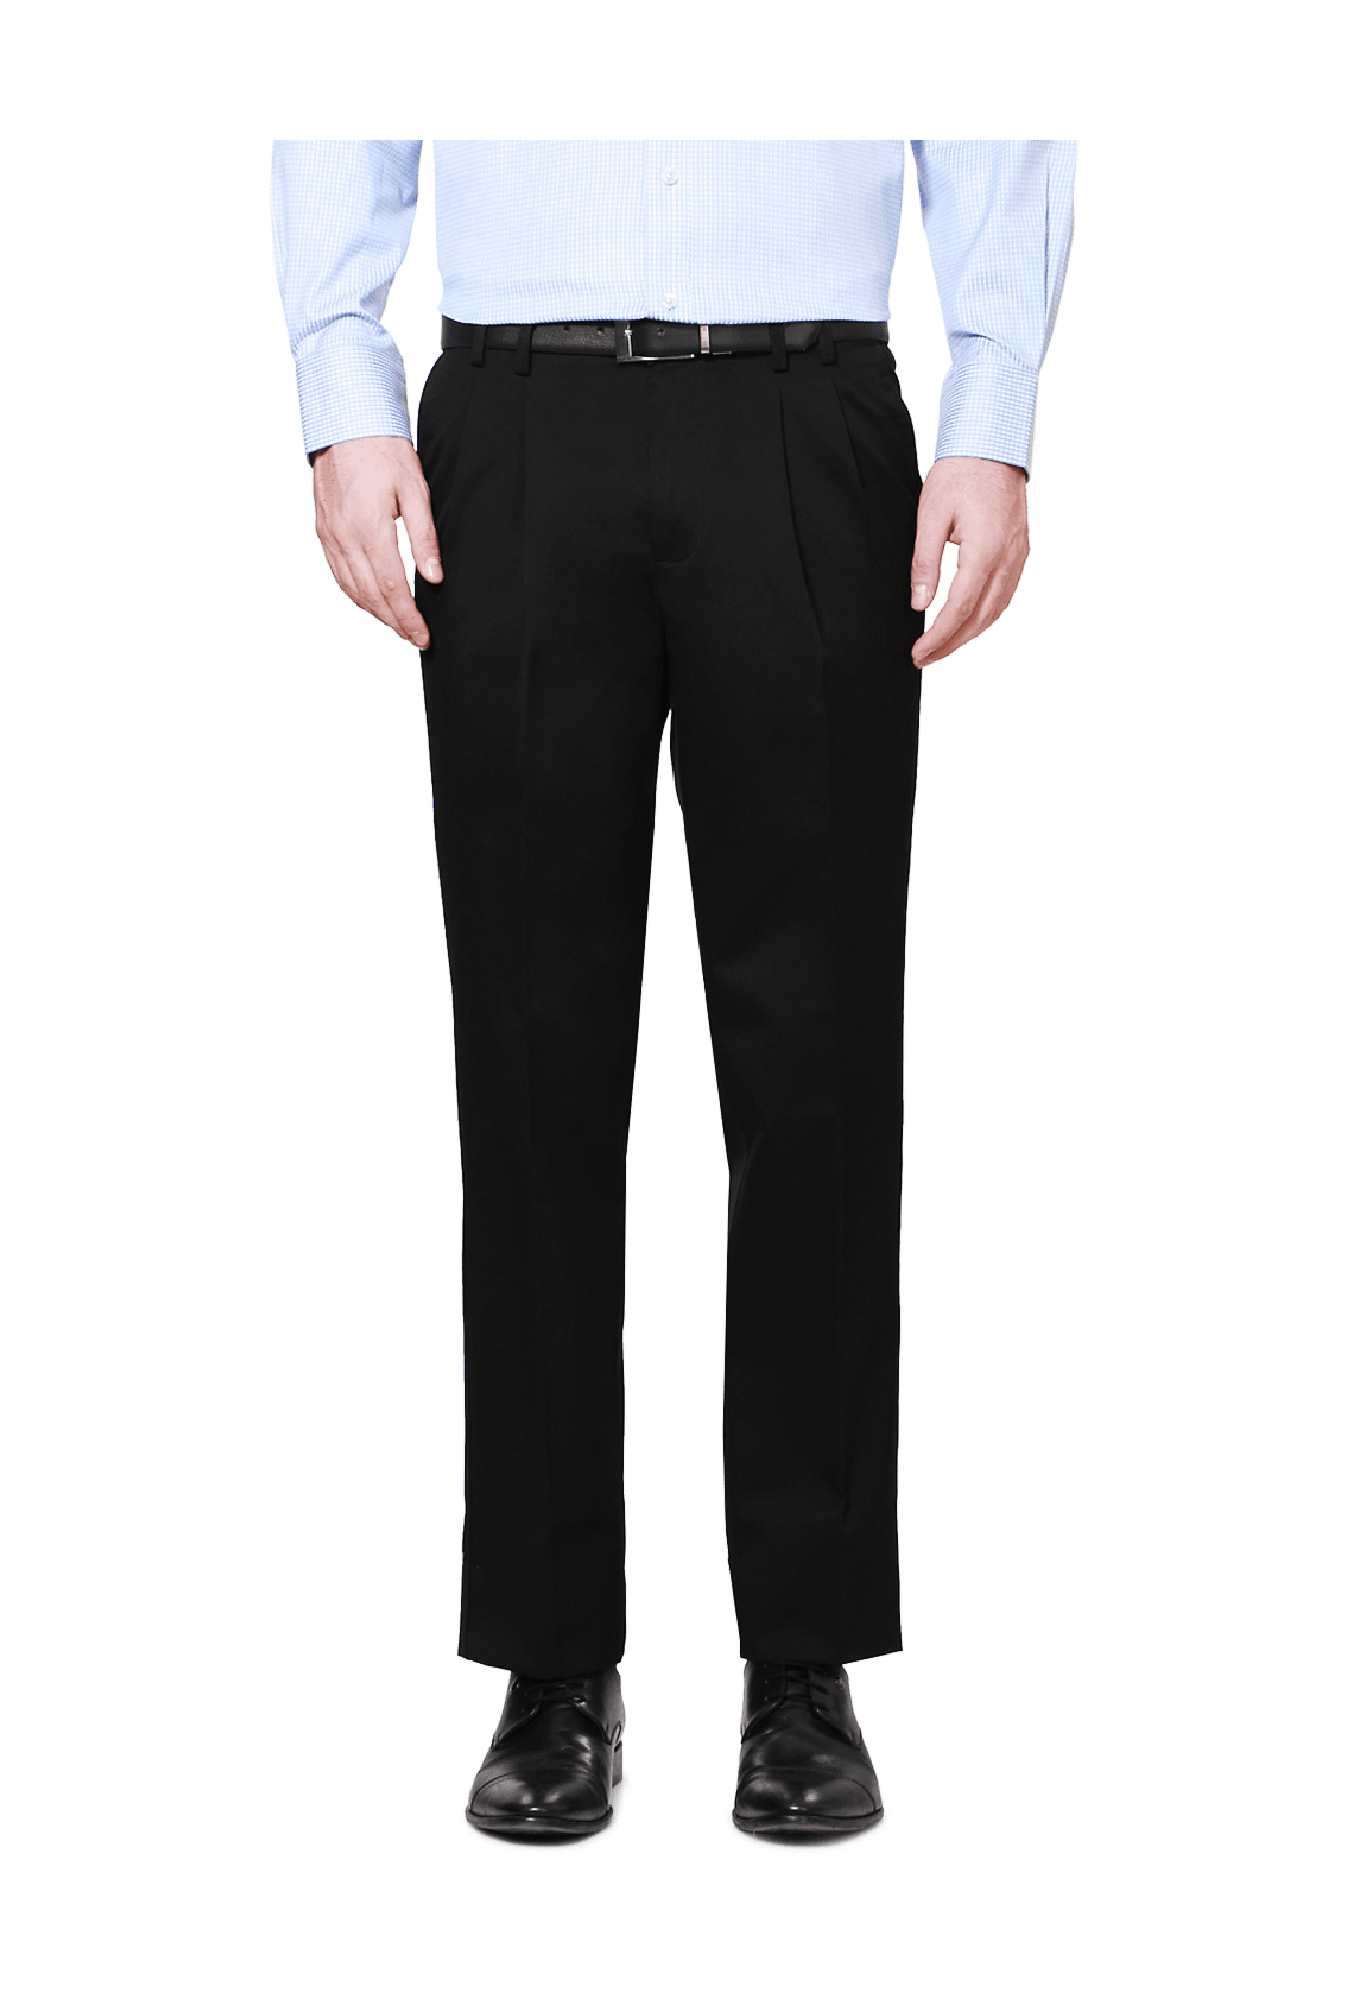 Buy Bound Pleated Smart Trousers online